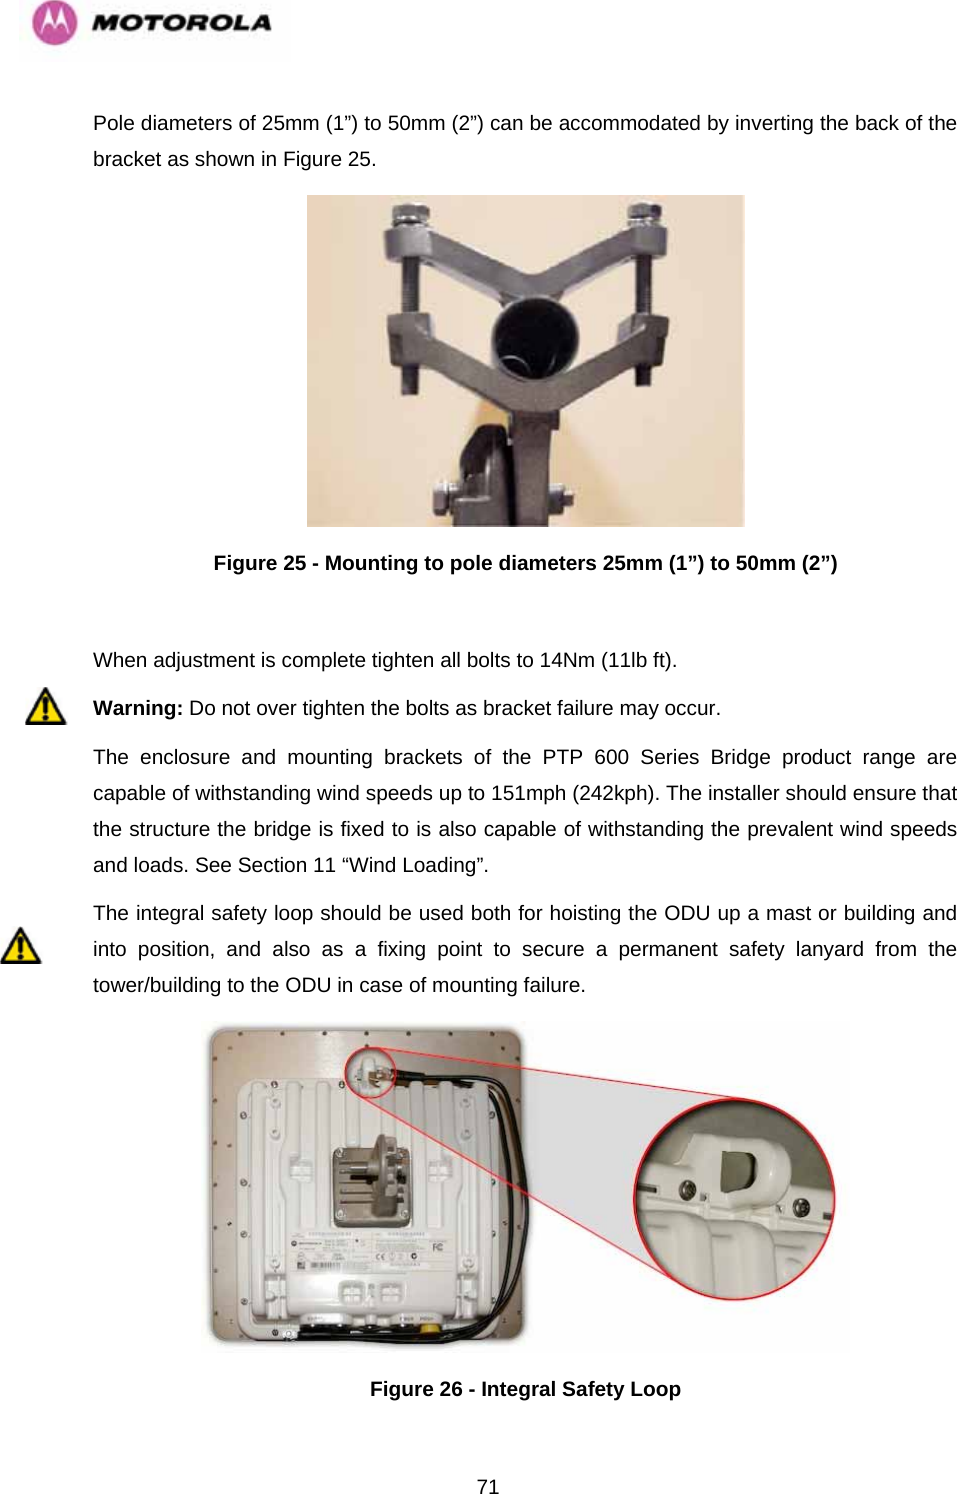   71Pole diameters of 25mm (1”) to 50mm (2”) can be accommodated by inverting the back of the bracket as shown in Figure 25.  Figure 25 - Mounting to pole diameters 25mm (1”) to 50mm (2”)  When adjustment is complete tighten all bolts to 14Nm (11lb ft). Warning: Do not over tighten the bolts as bracket failure may occur. The enclosure and mounting brackets of the PTP 600 Series Bridge product range are capable of withstanding wind speeds up to 151mph (242kph). The installer should ensure that the structure the bridge is fixed to is also capable of withstanding the prevalent wind speeds and loads. See Section 11 “Wind Loading”. The integral safety loop should be used both for hoisting the ODU up a mast or building and into position, and also as a fixing point to secure a permanent safety lanyard from the tower/building to the ODU in case of mounting failure.  Figure 26 - Integral Safety Loop 